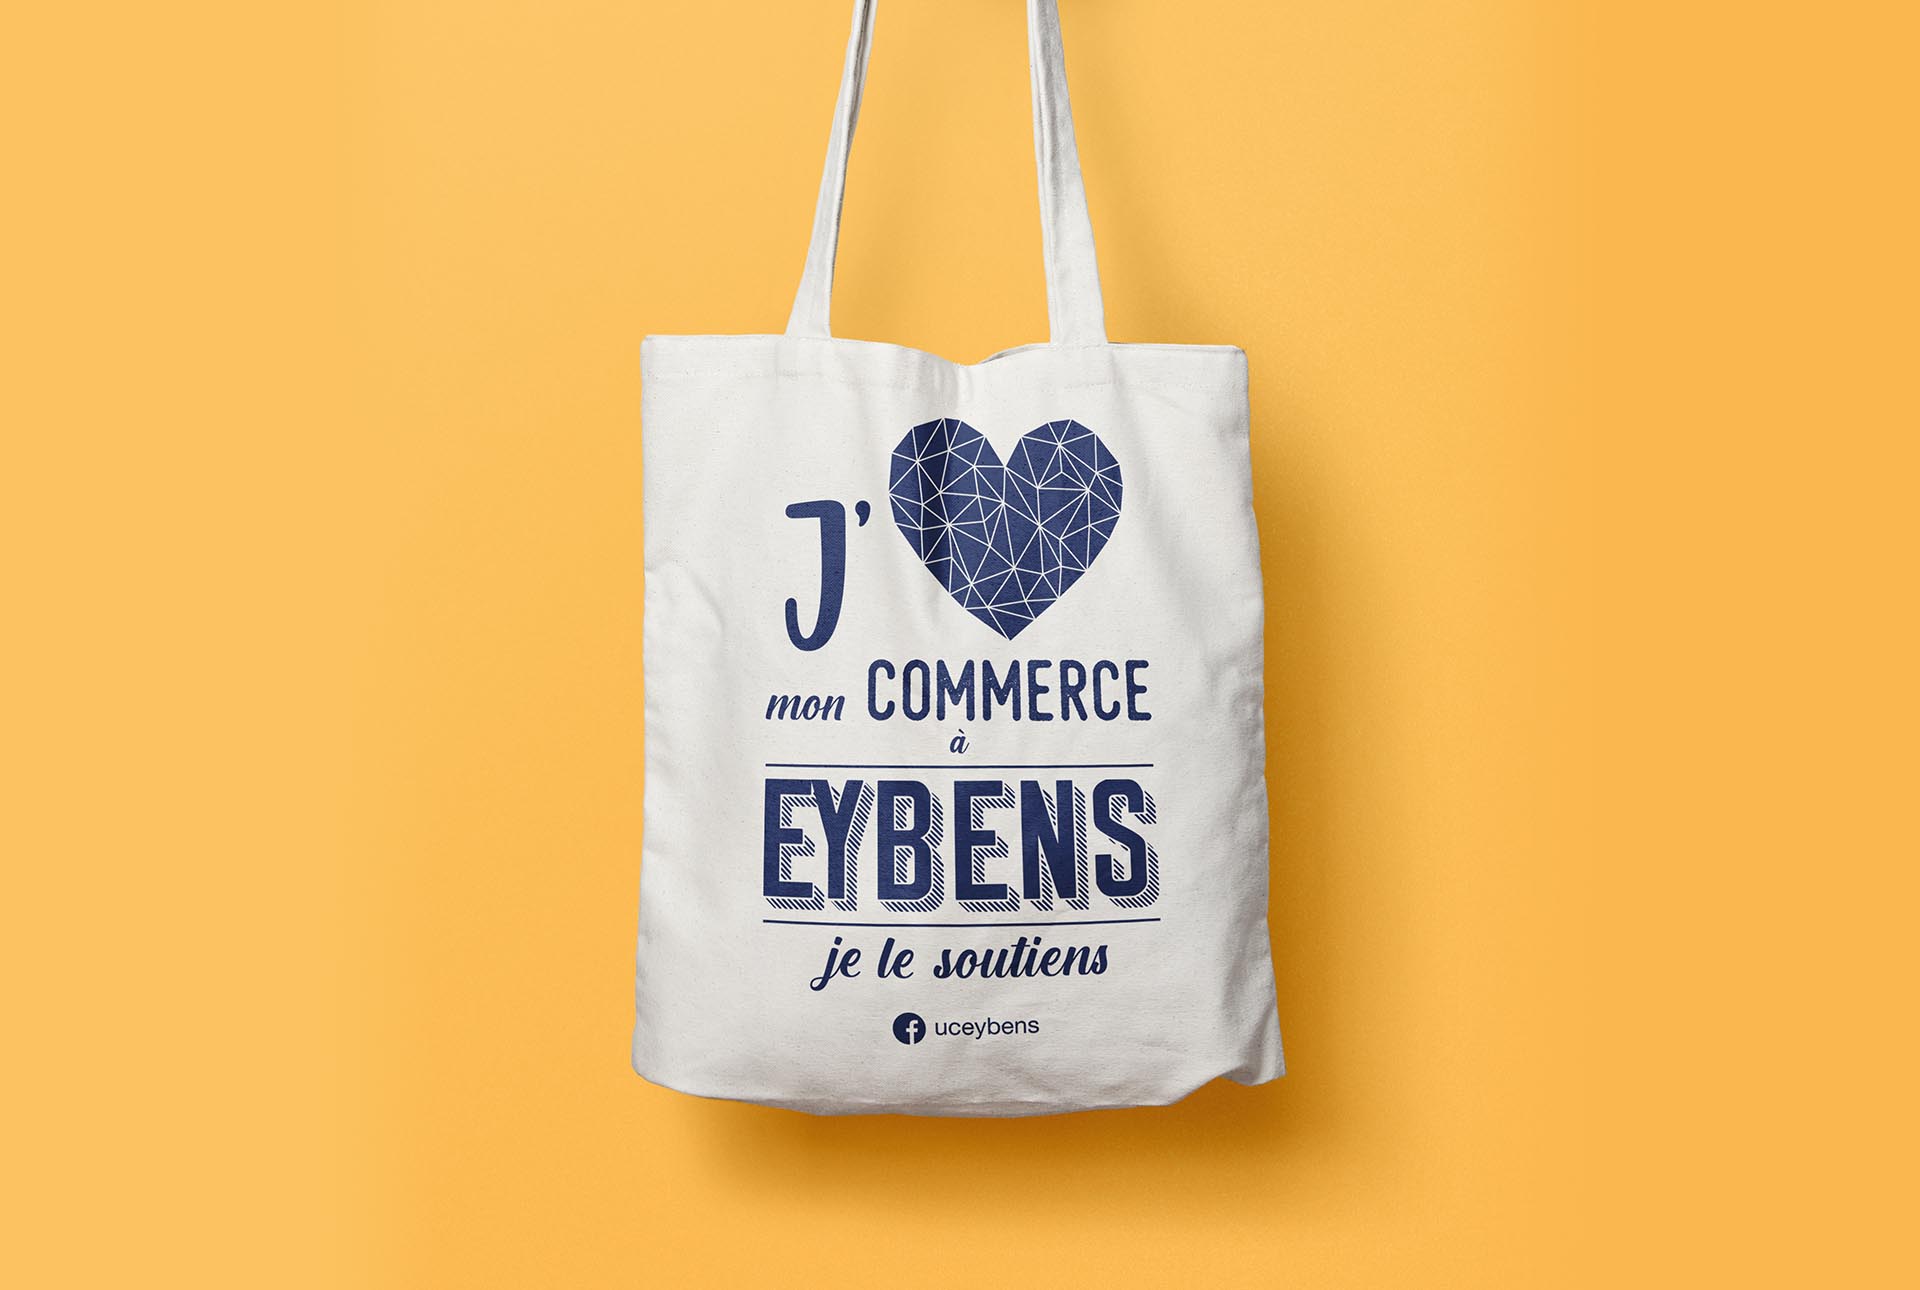 Union commerciale Eybens creation tote bag graphiste grenoble